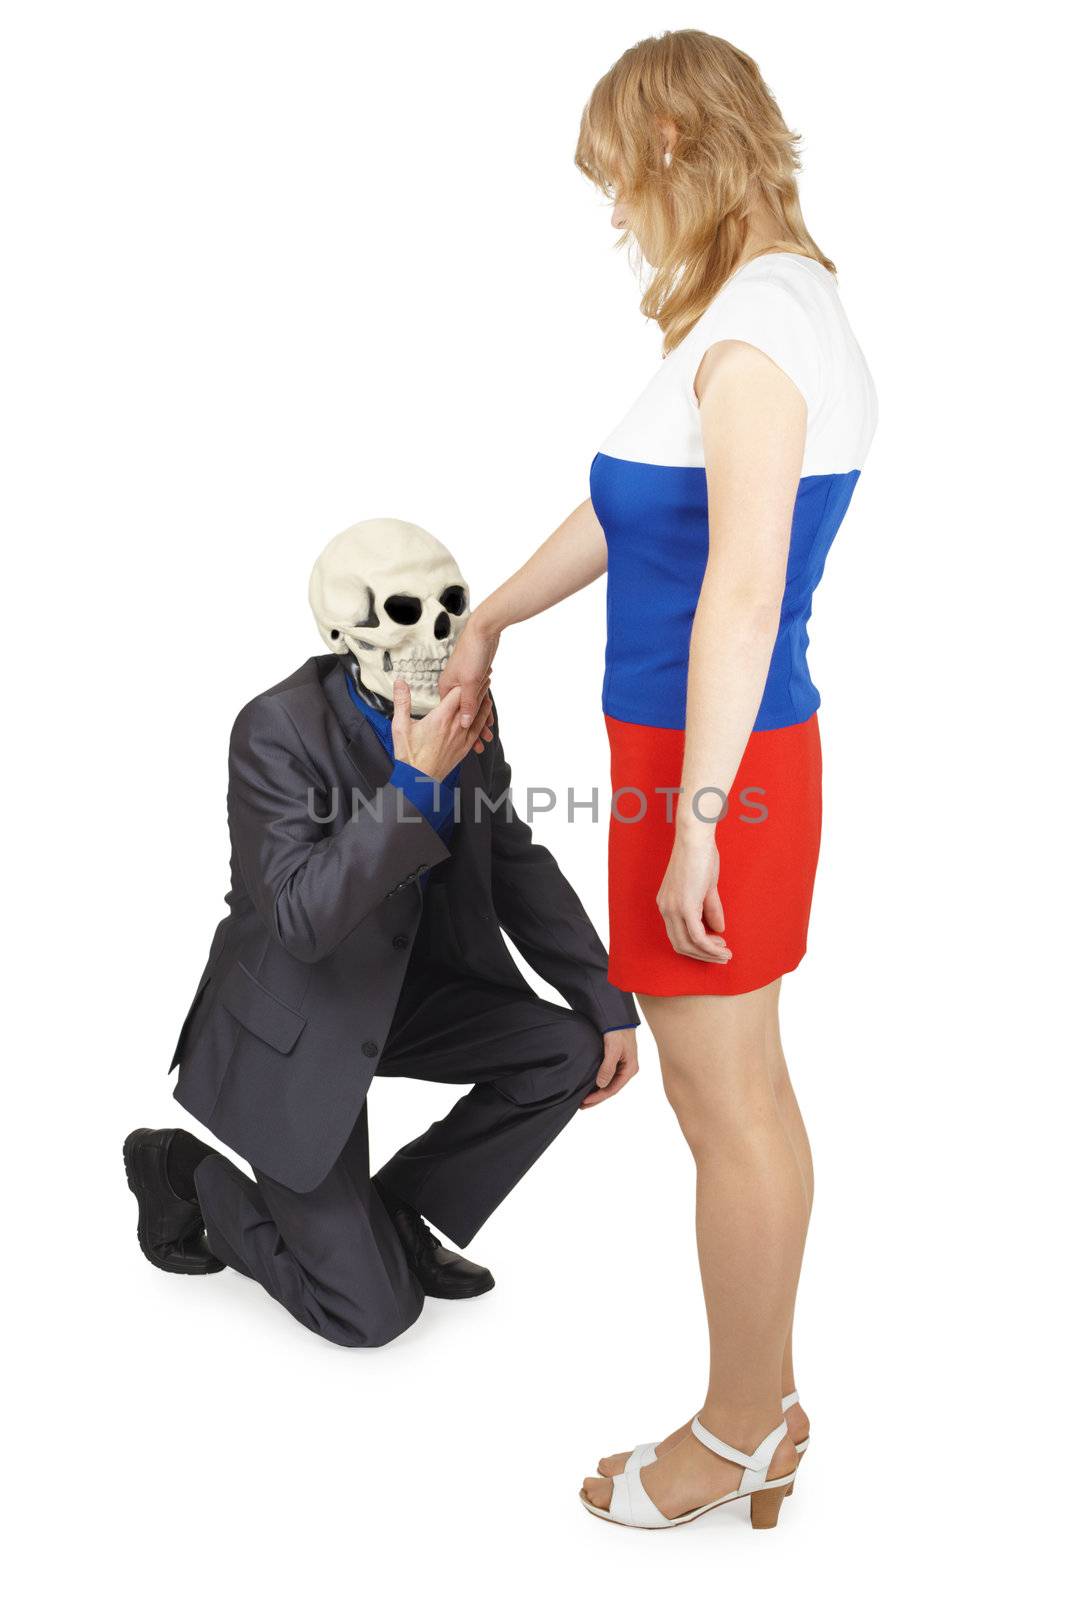 The skeleton kisses a hand to the young woman